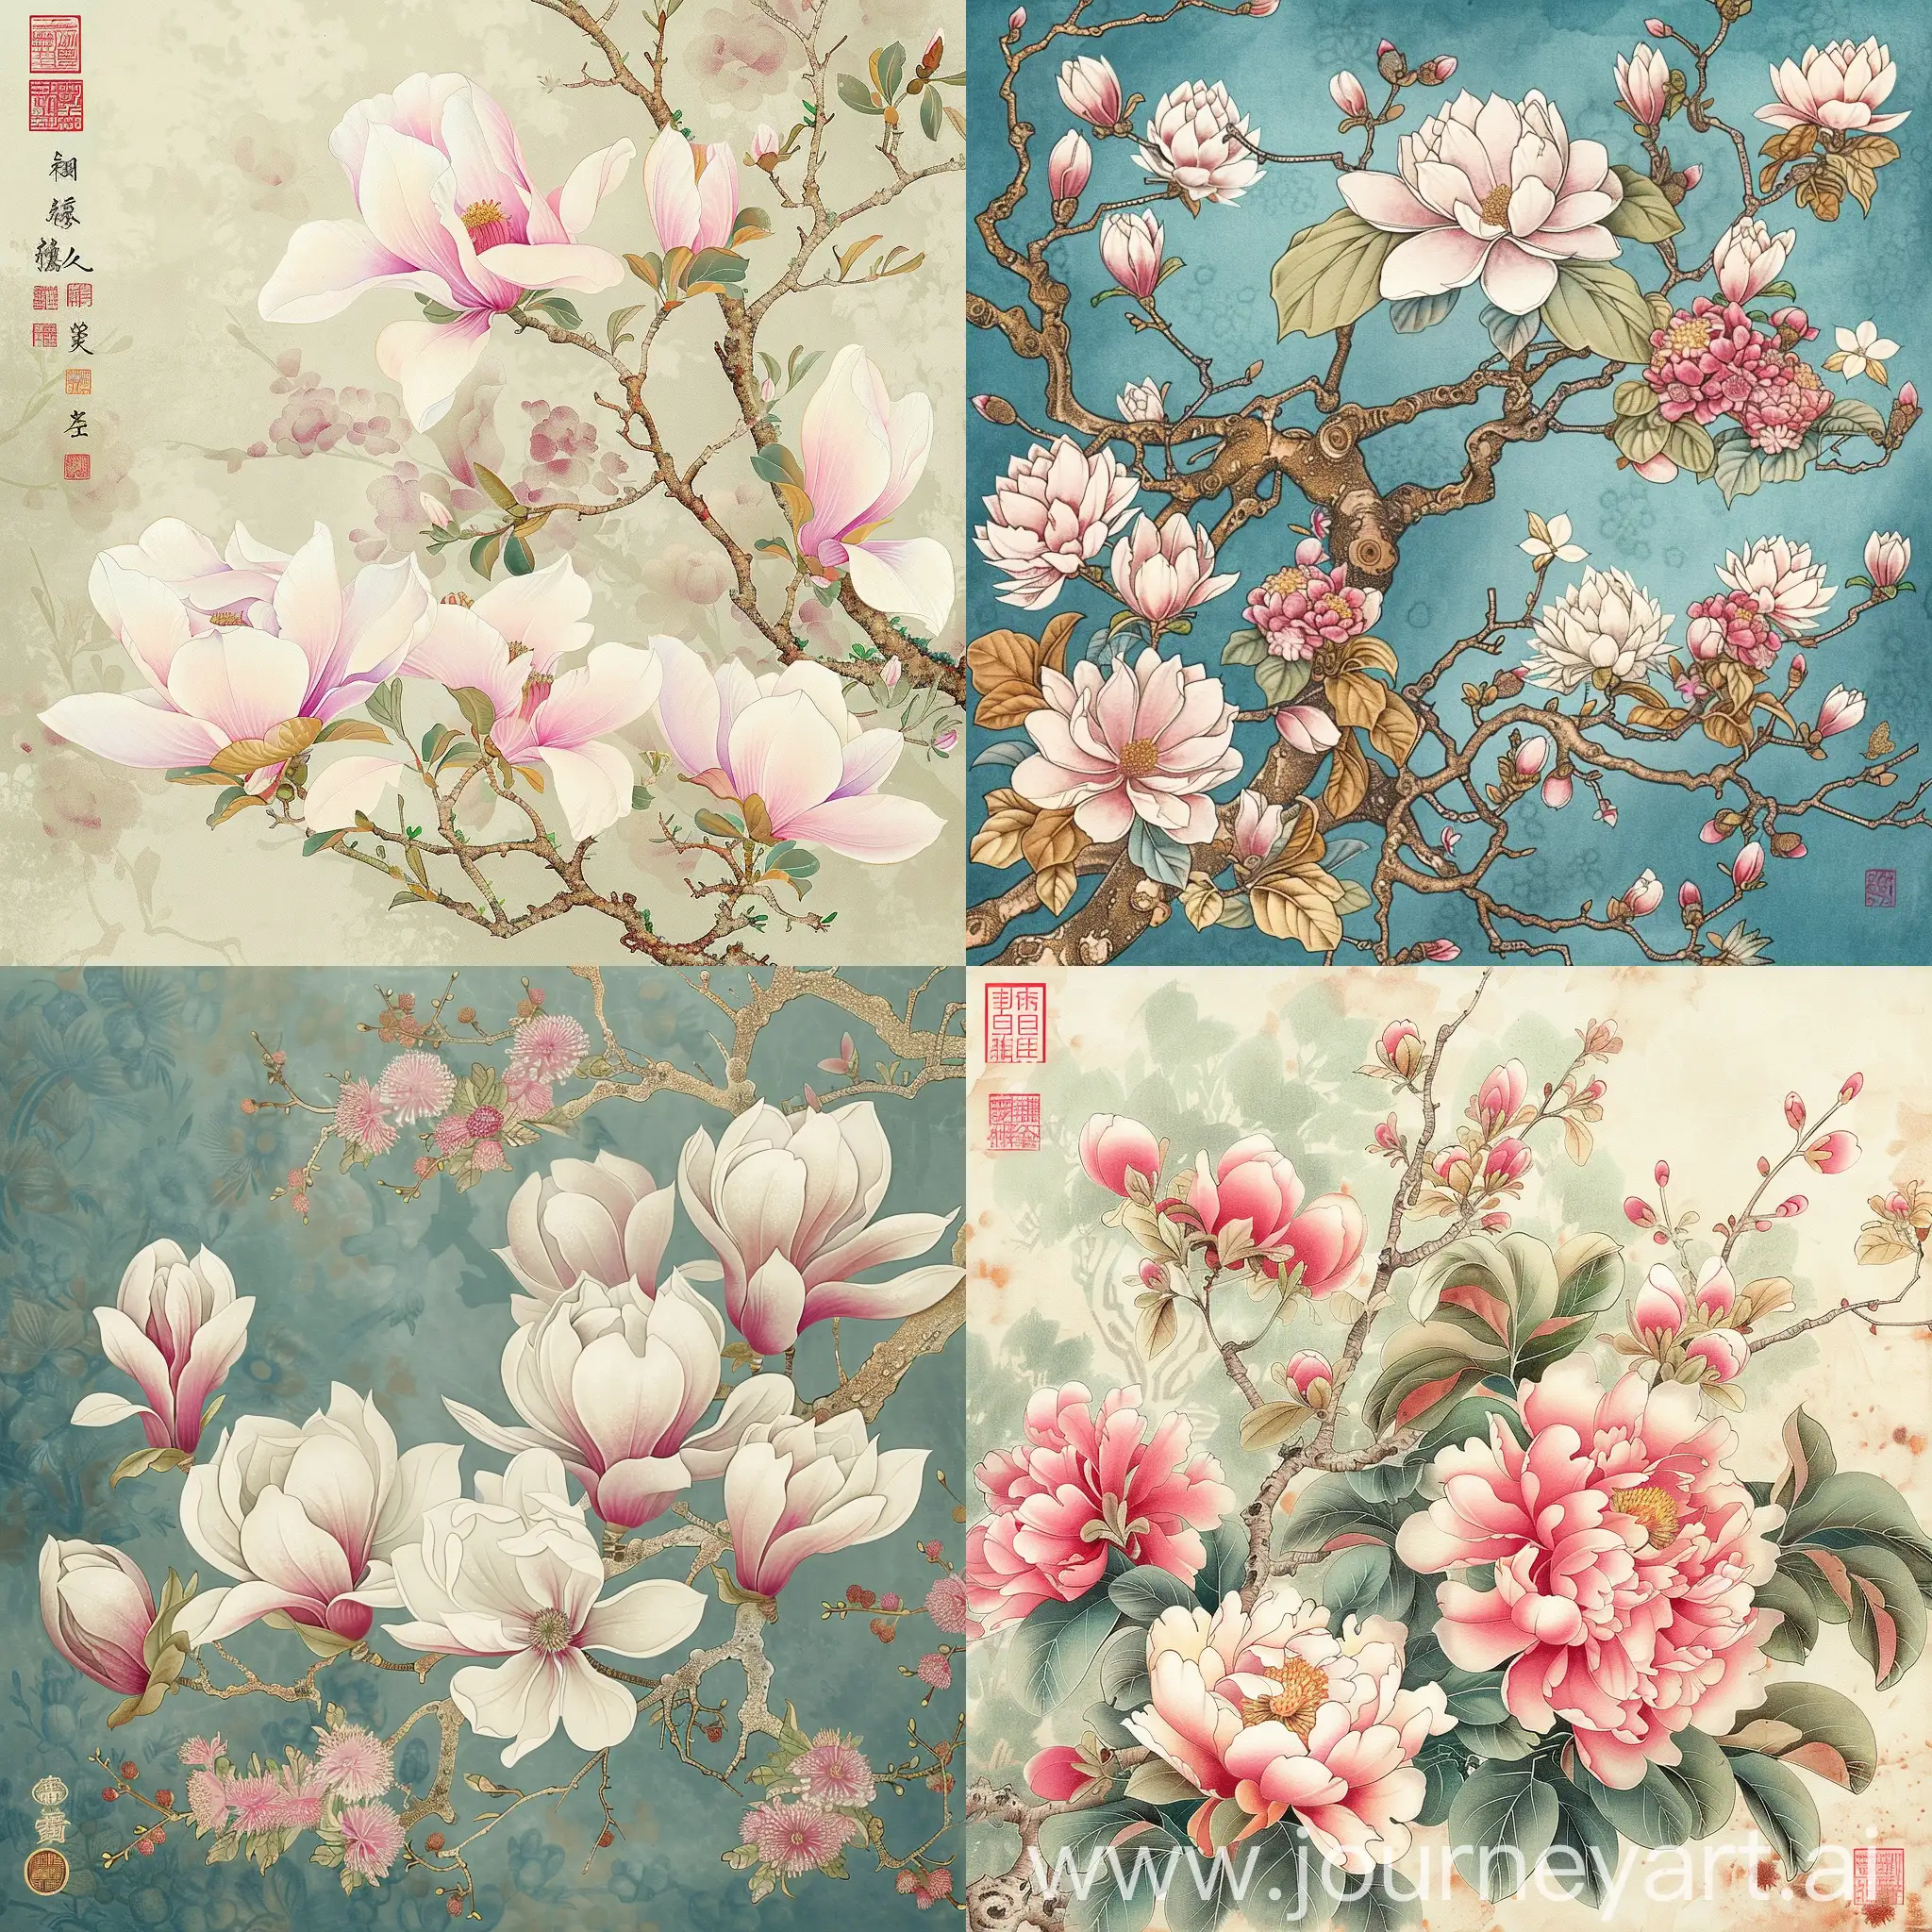 Floral-Symphony-Vibrant-Magnolias-Plum-Blossoms-and-Peonies-in-a-Serene-Garden-Landscape